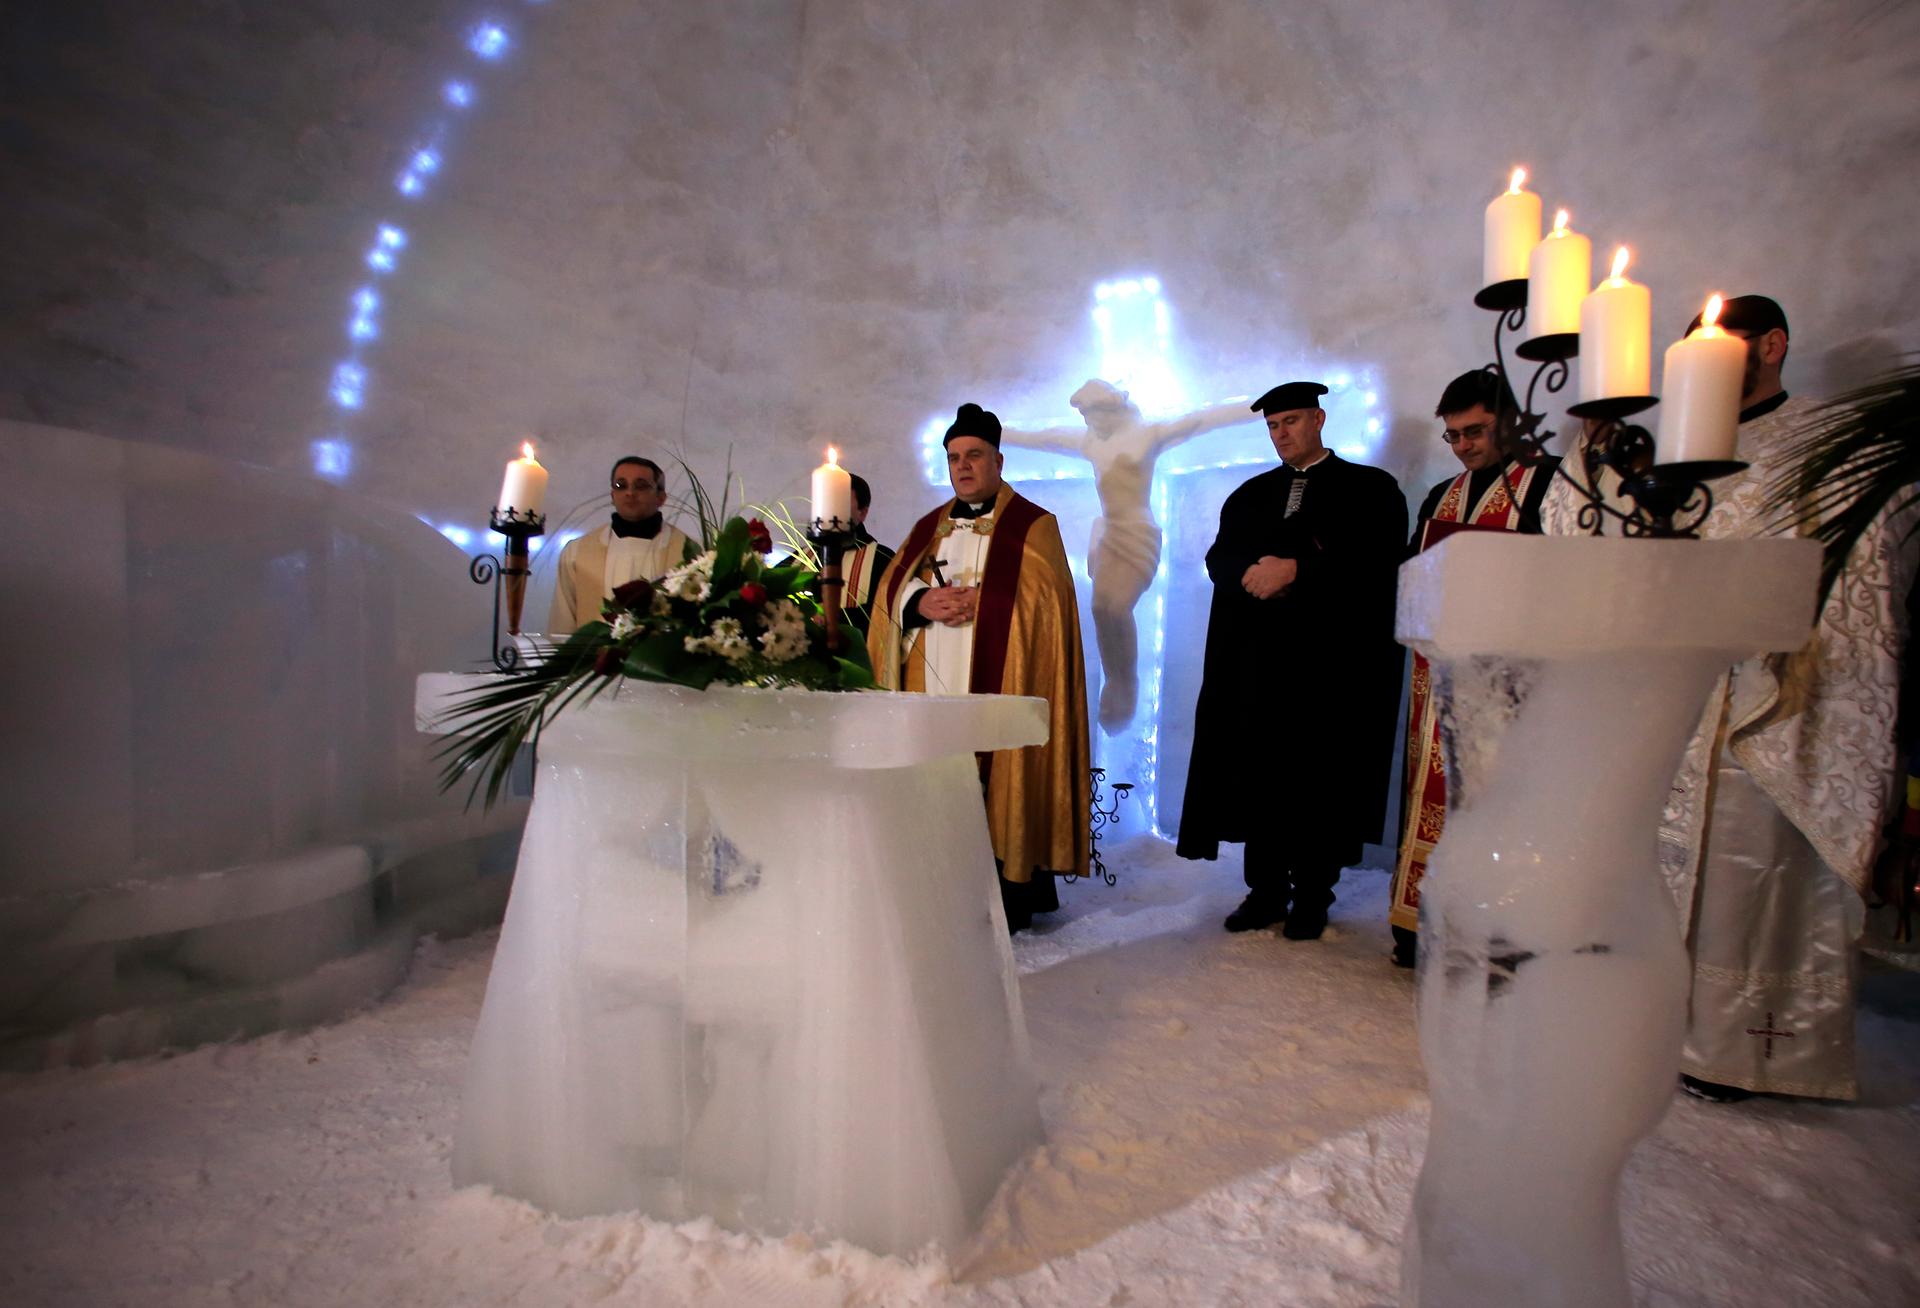 A group of priests of various congregations hold an inaugural mass for a church made entirely from ice at Balea Lac resort.